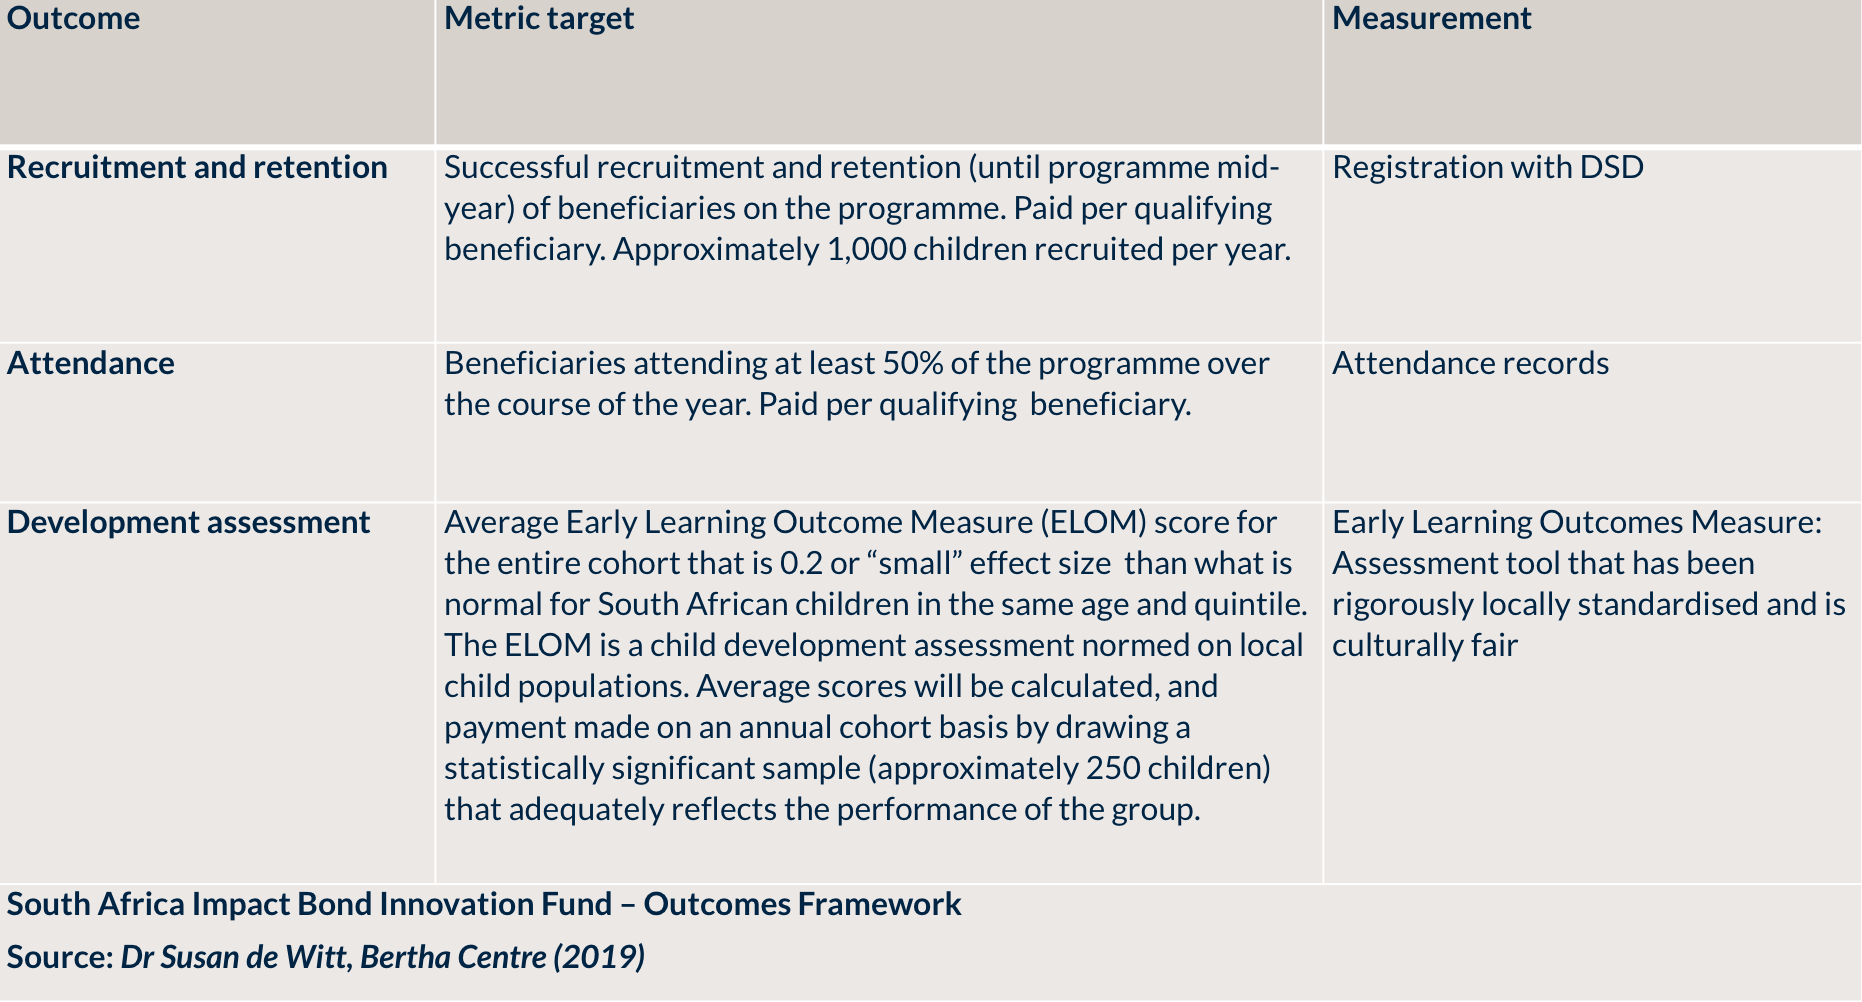 SouthAfricaImpactBondInnovationFund_Outcomes.png